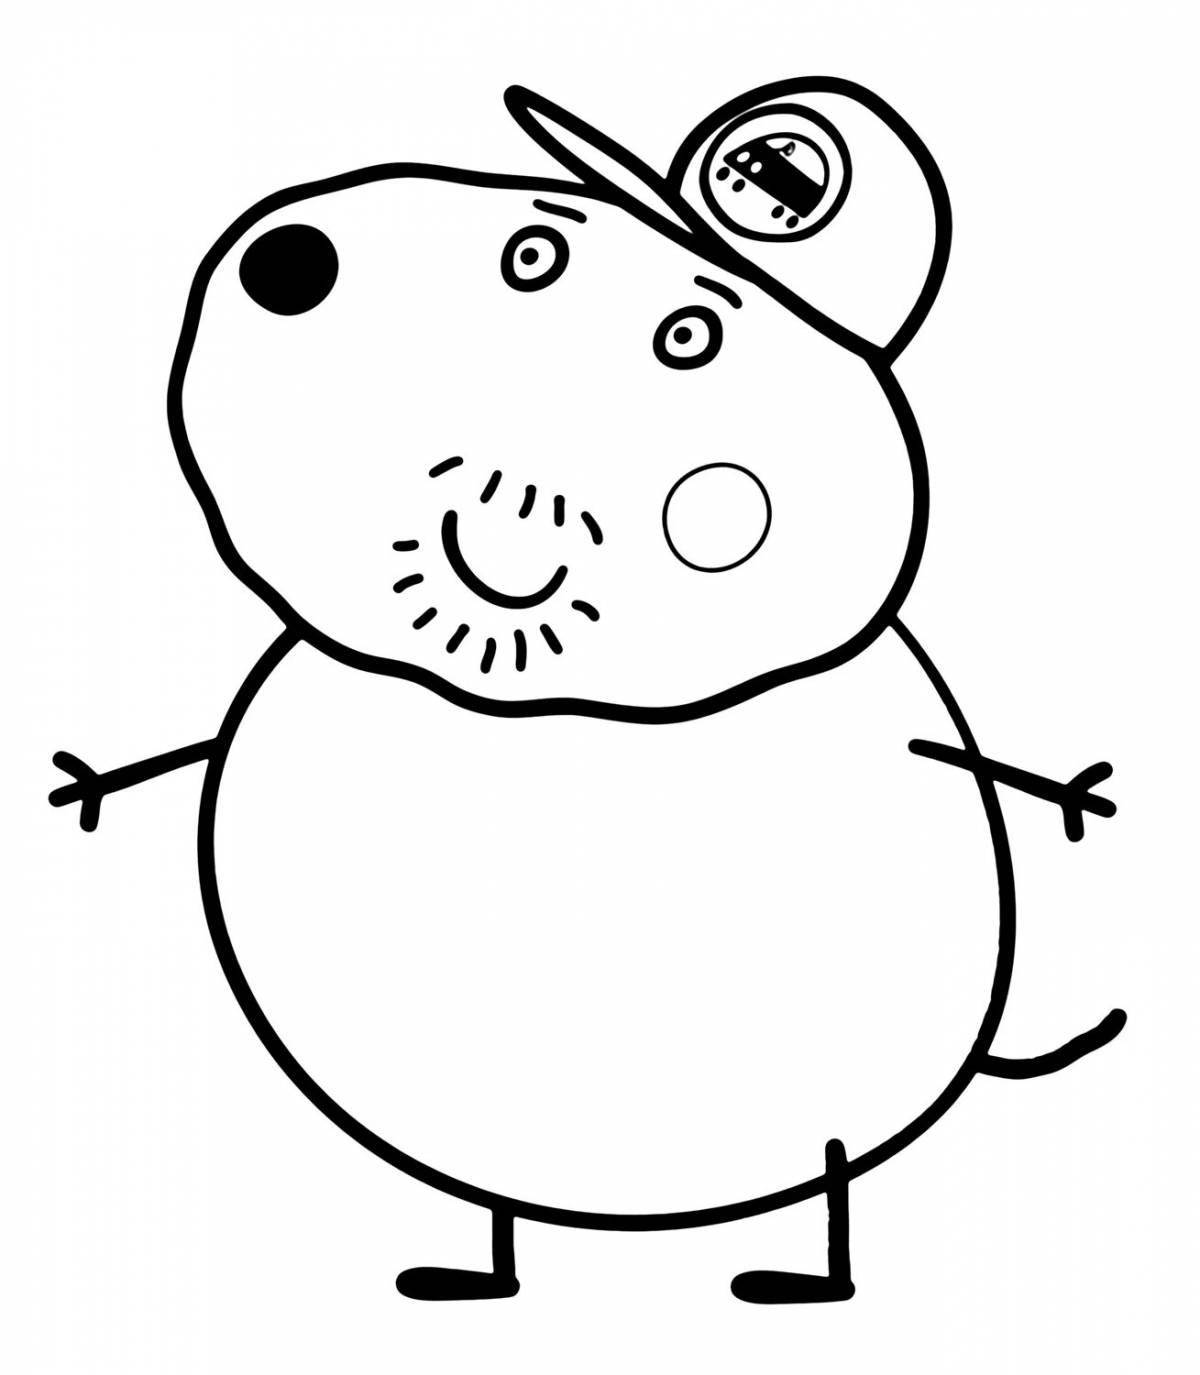 Coloring page shining mother pig